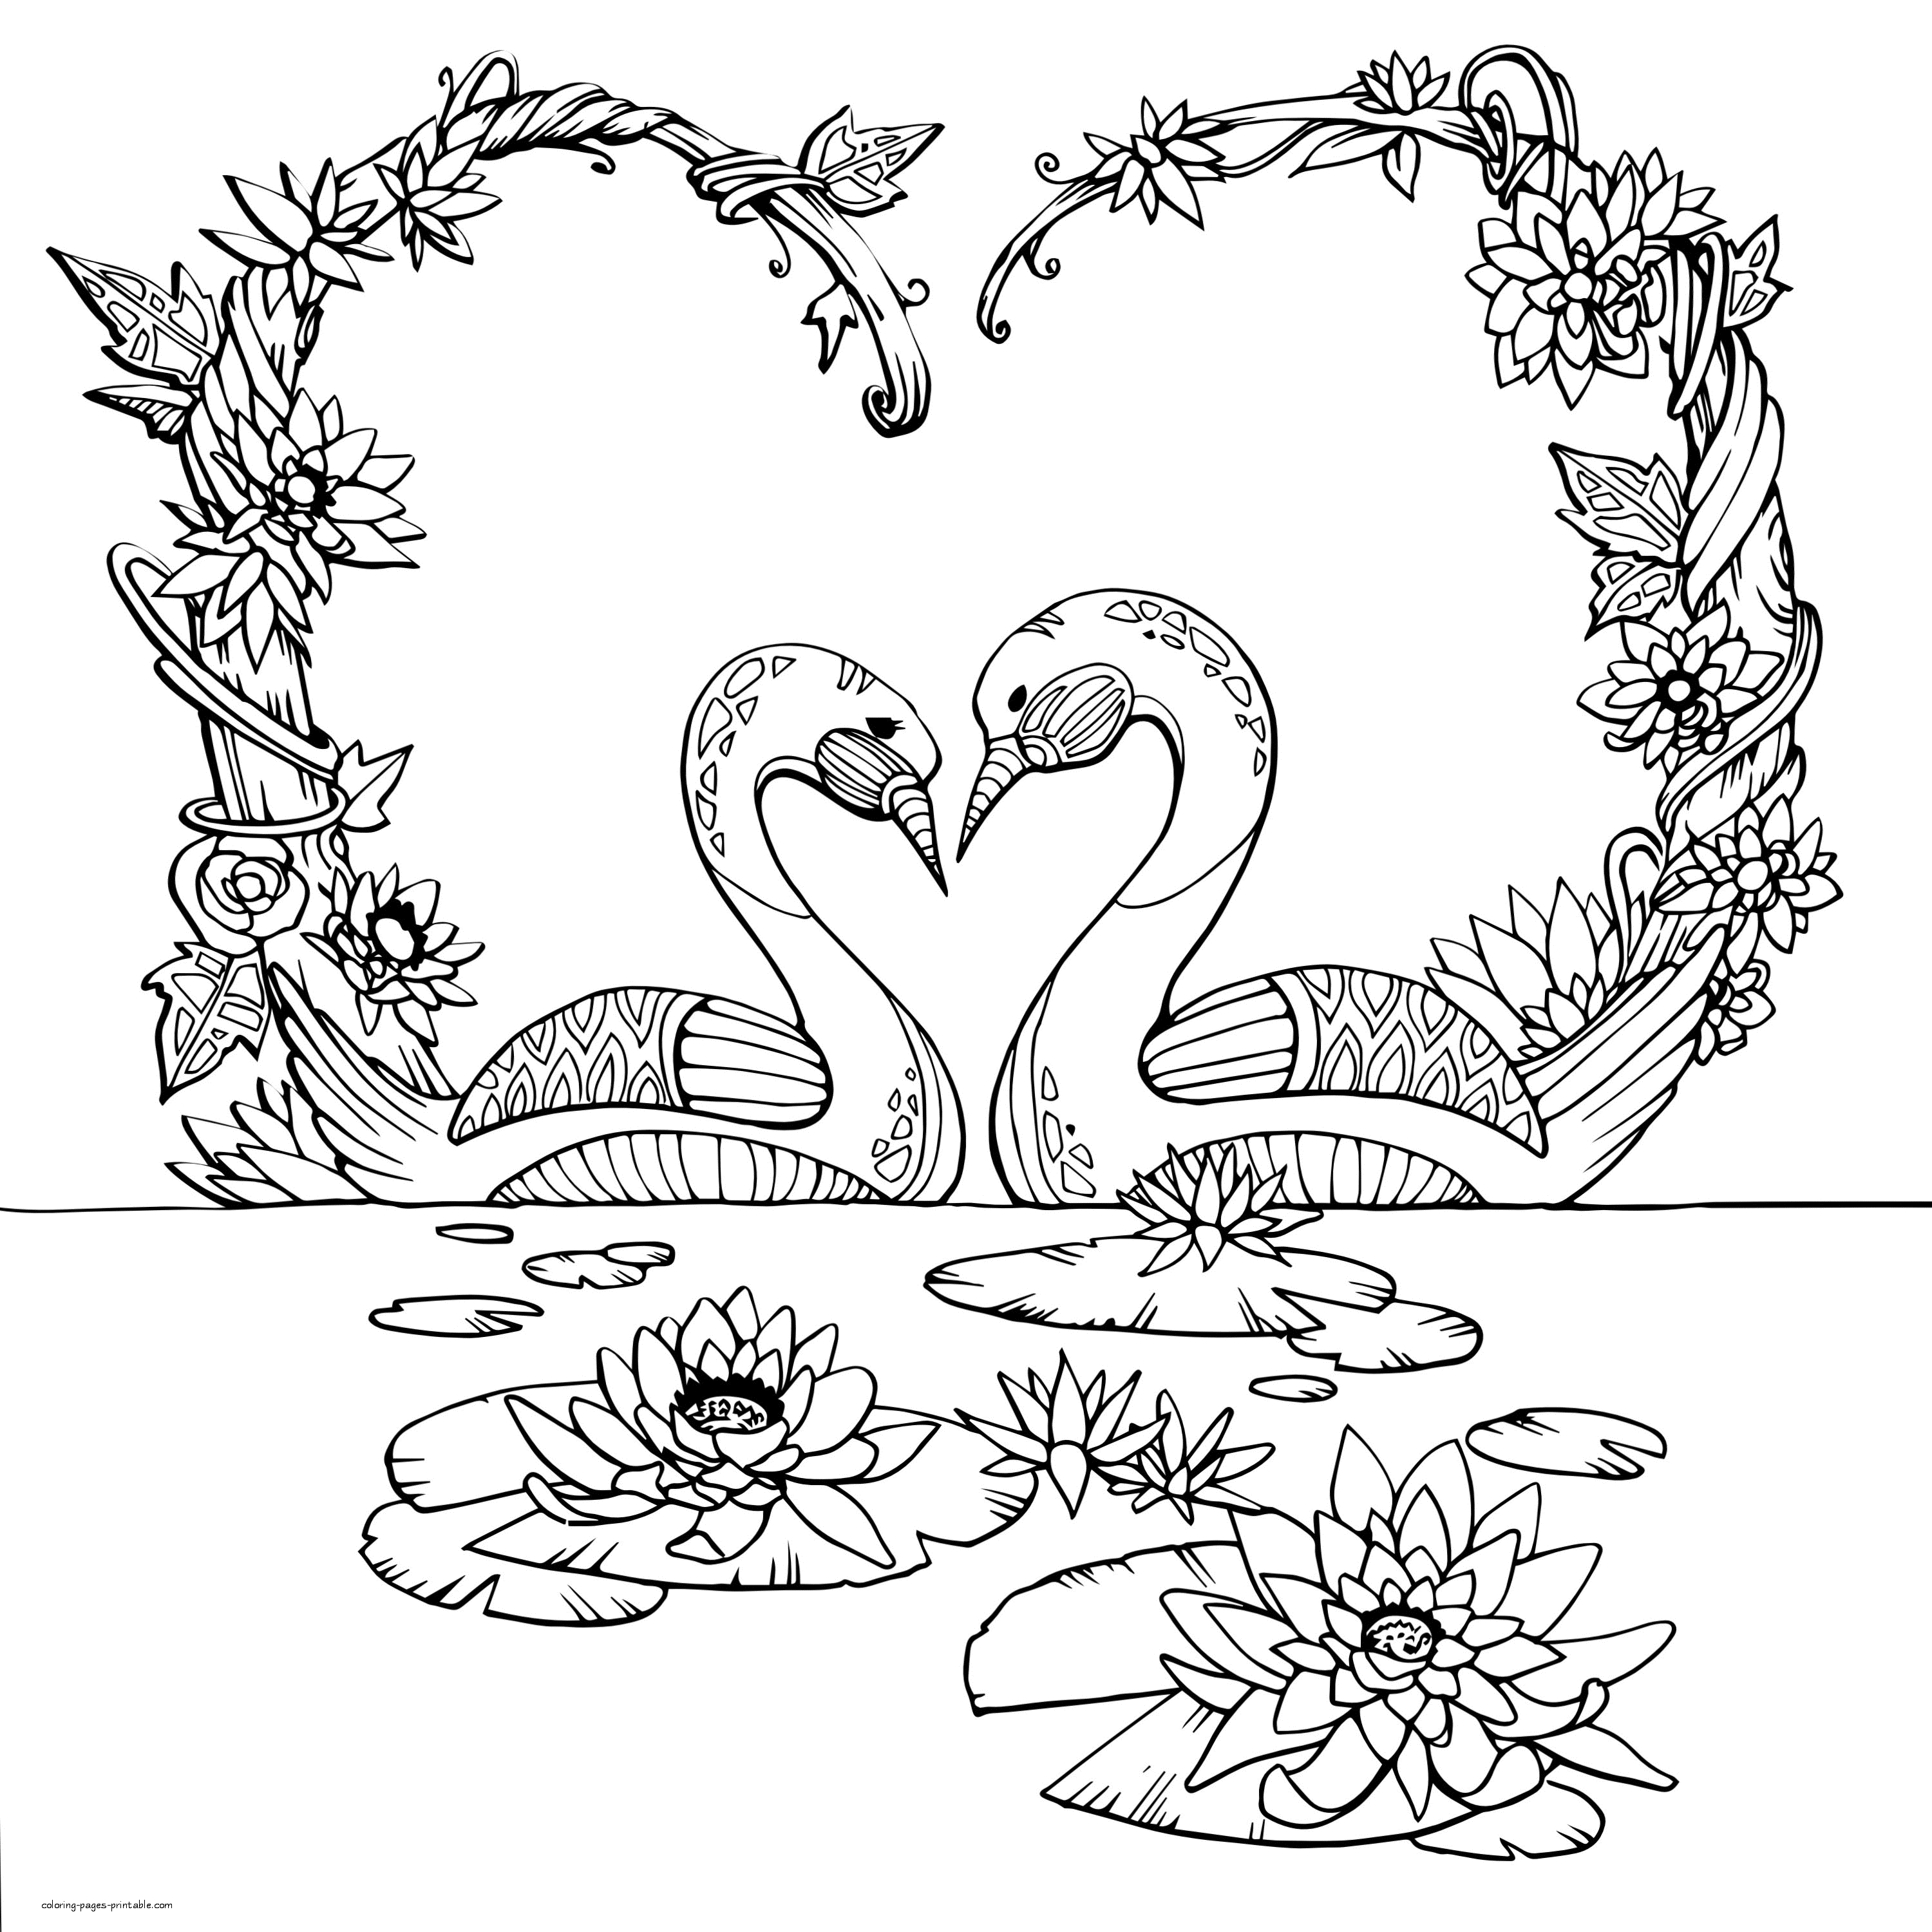 Pair Of Swans Adult Coloring Page